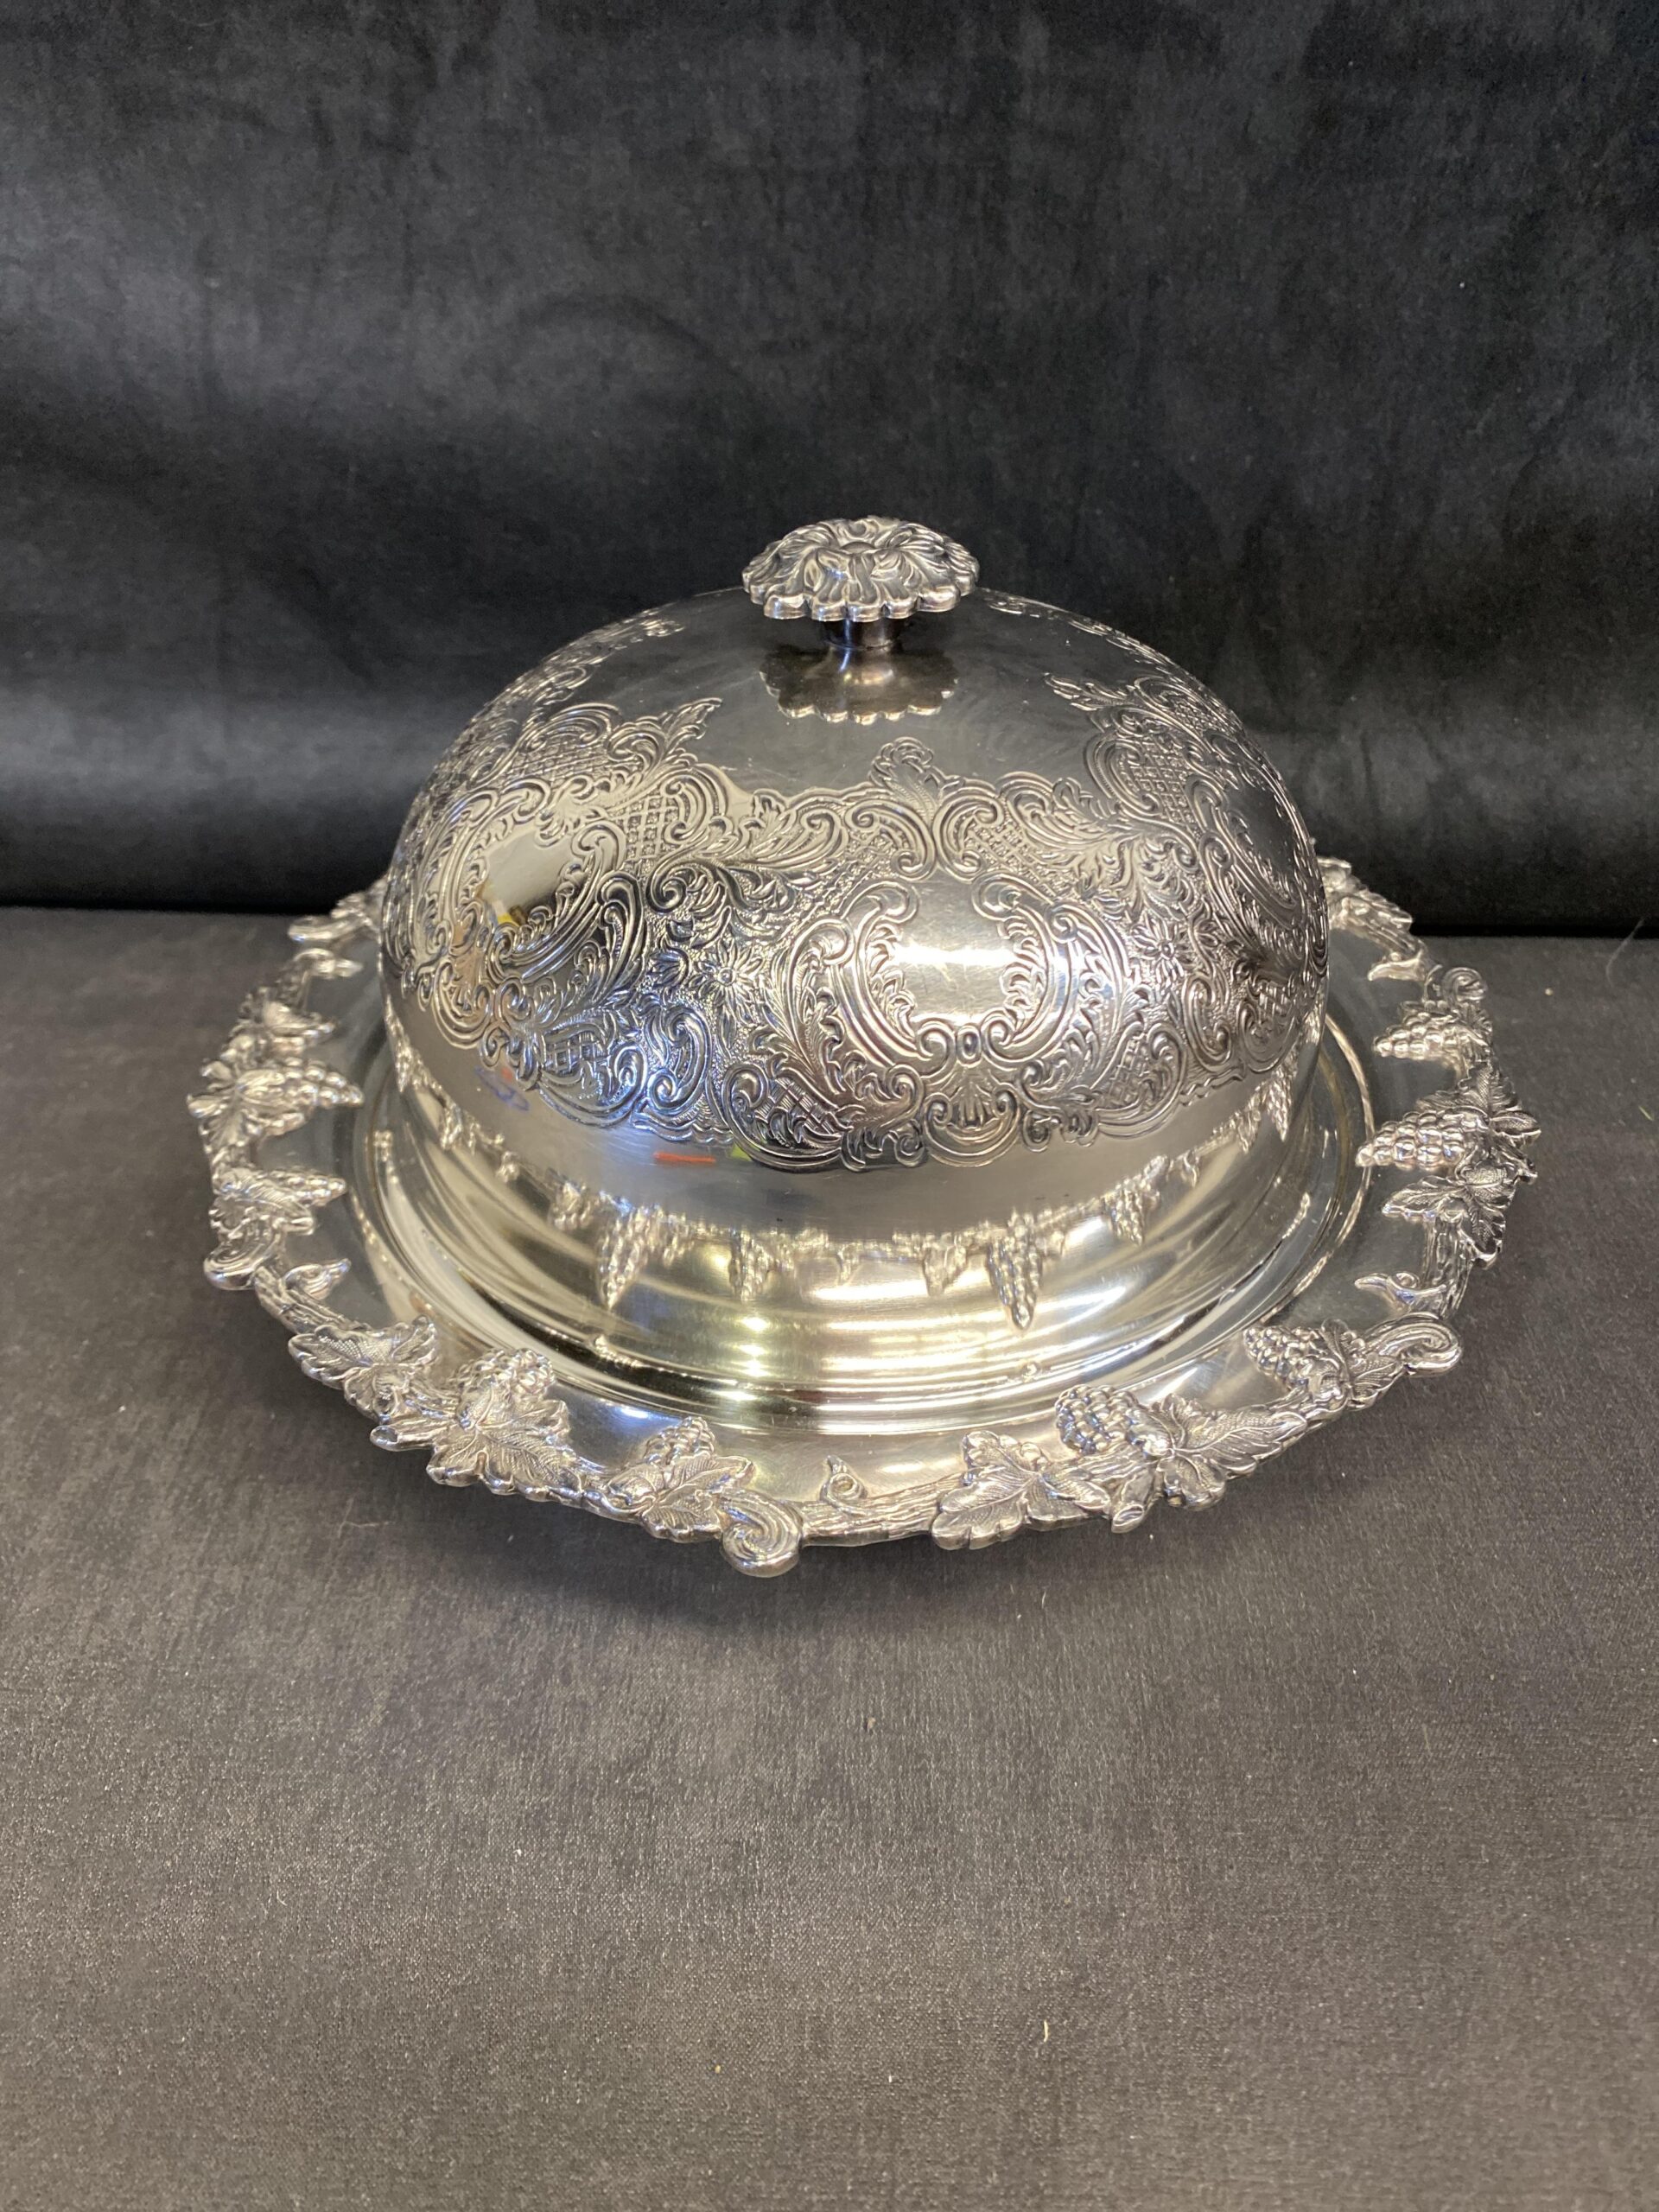 3PC Silverplate Domed Server